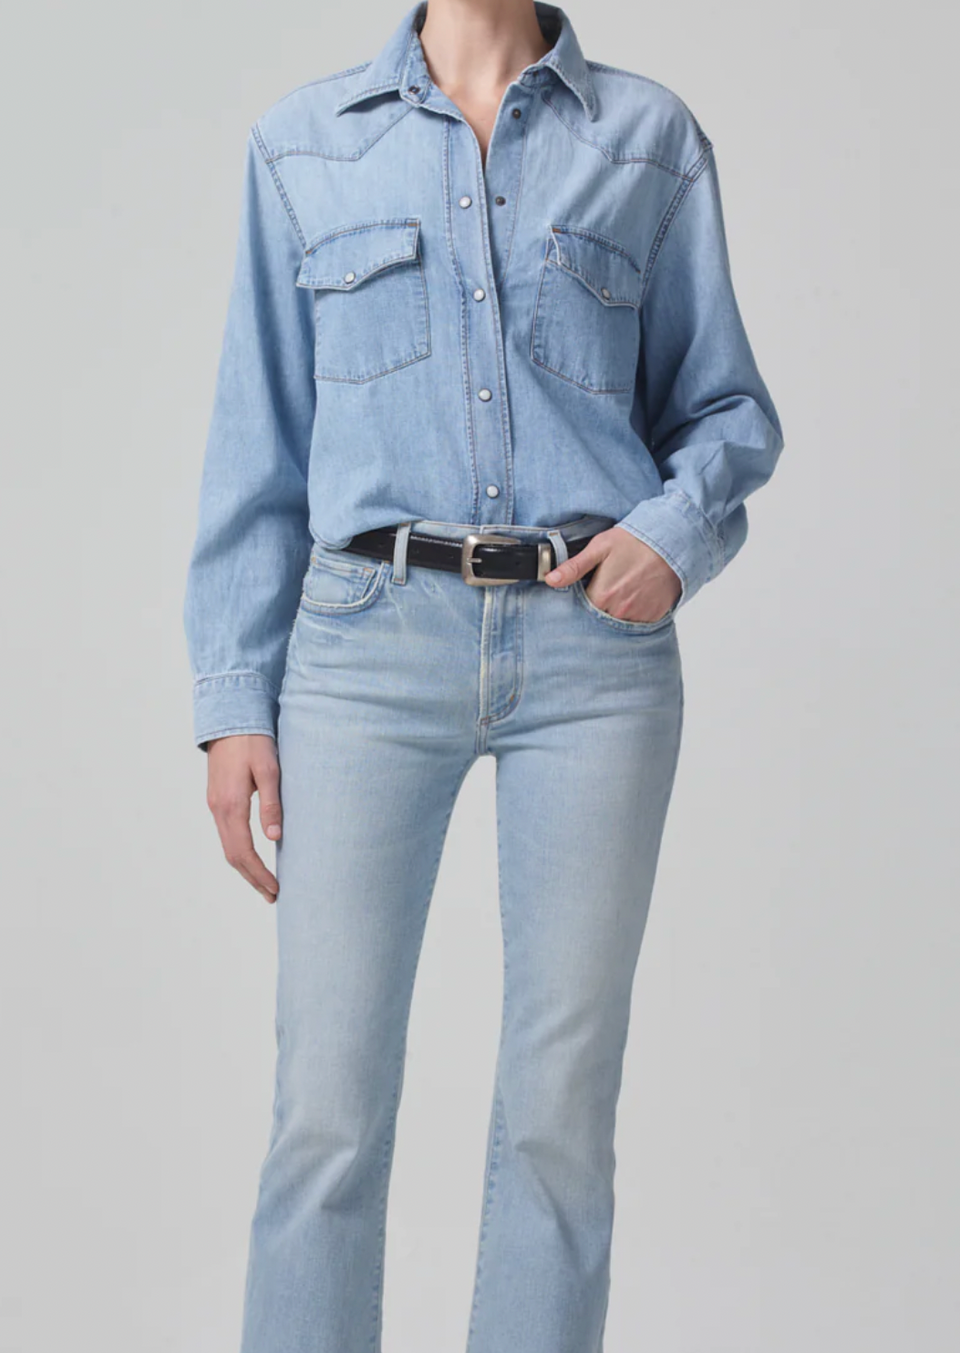 The Citizens of Humanity Cropped Western Shirt in Pharos